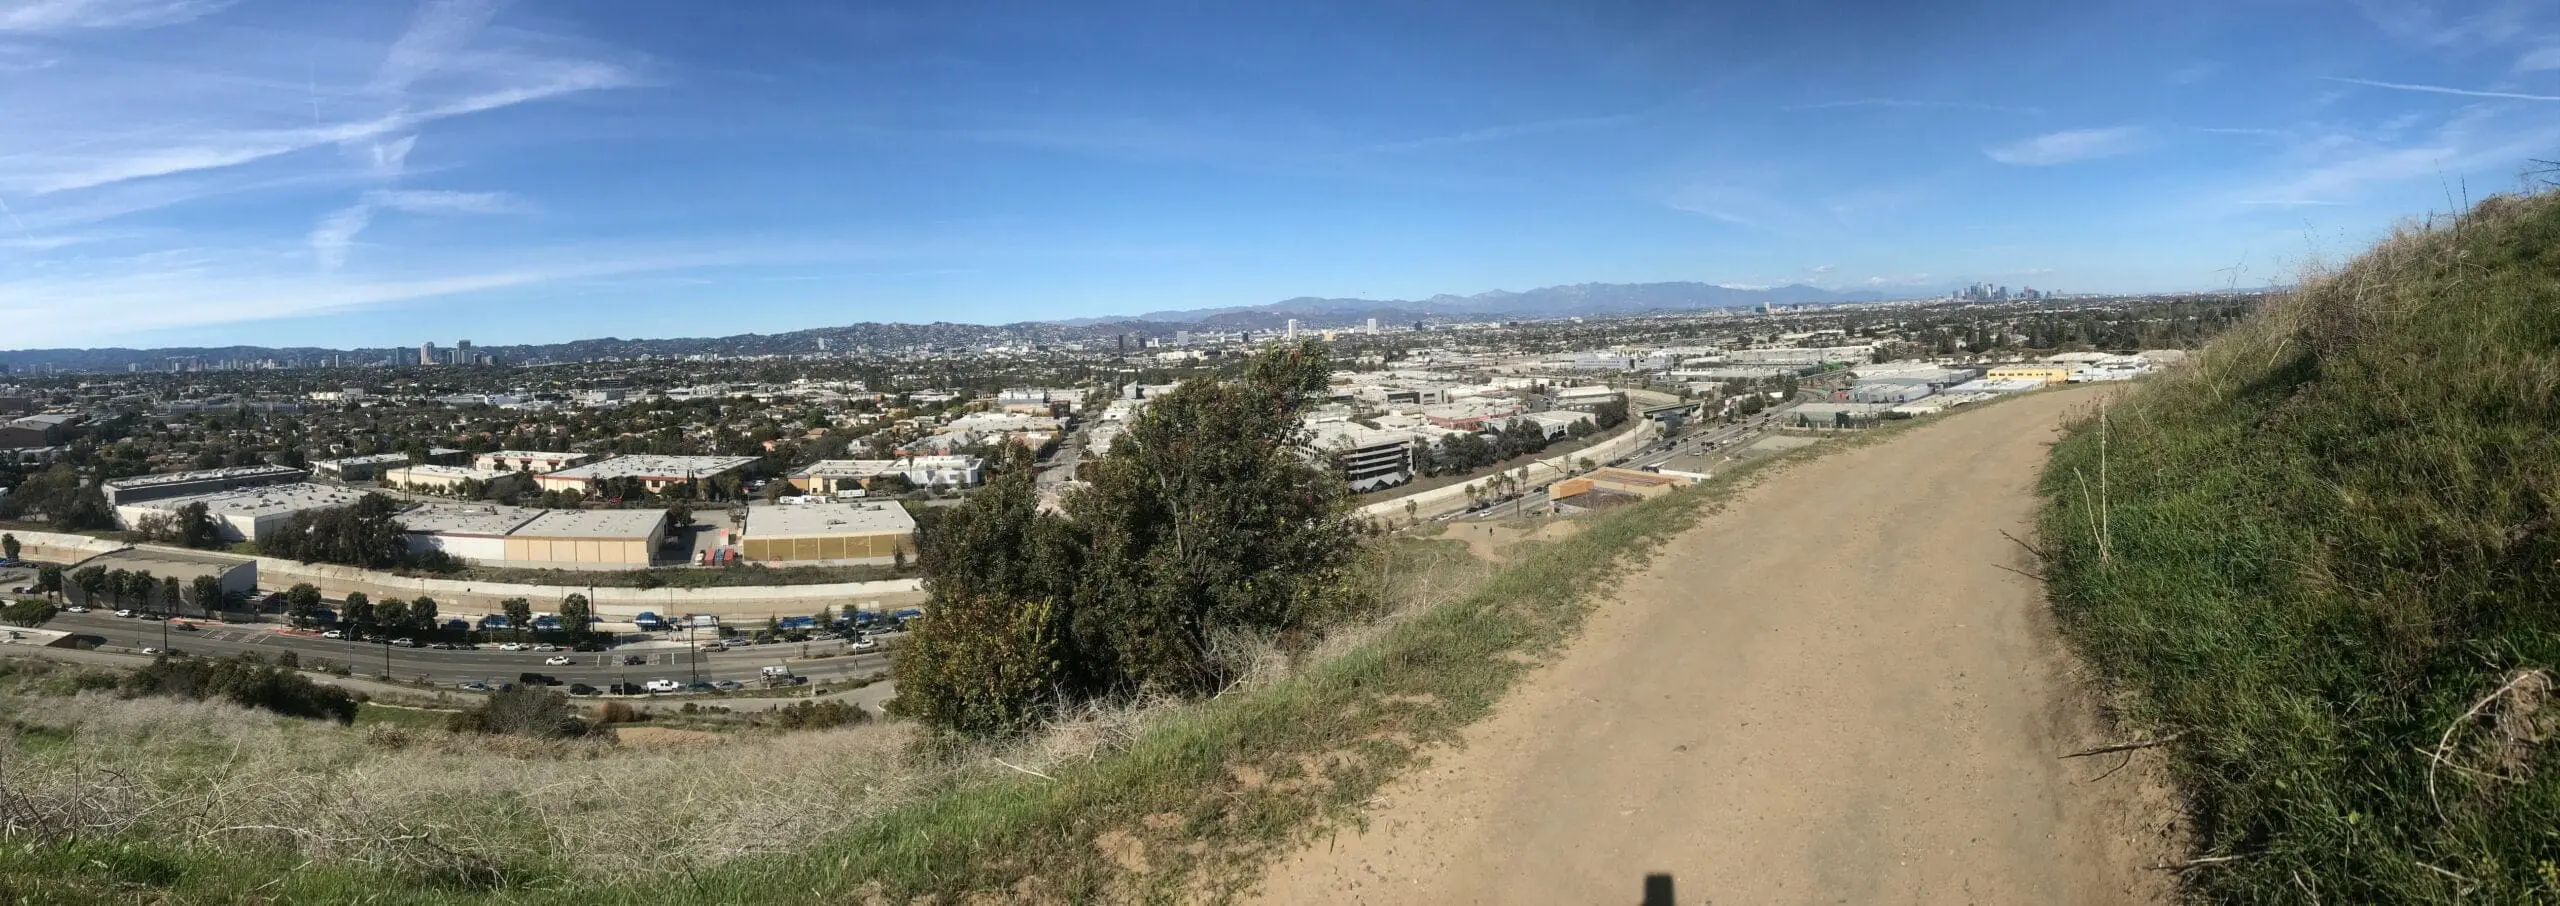 Culver City Stairs trail